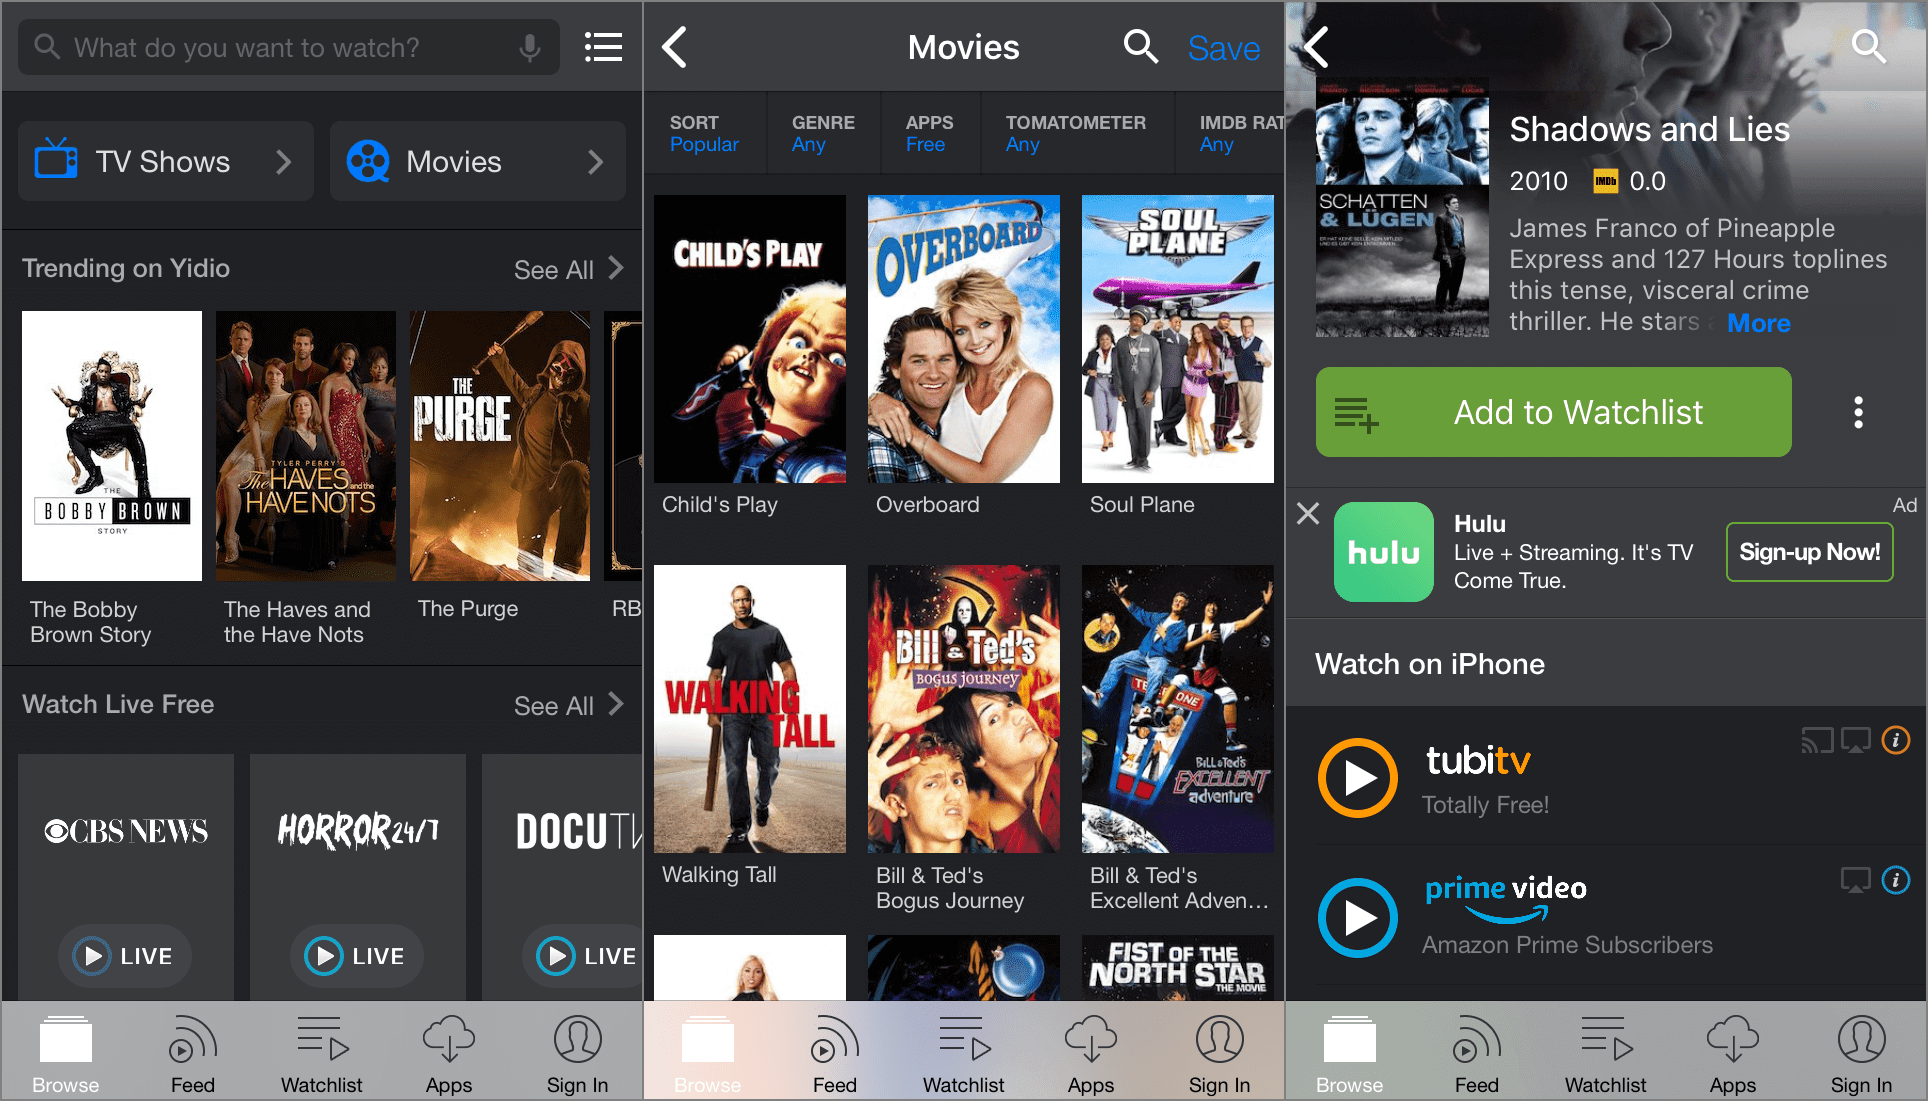 7 Best Movies Apps for Android like Showbox - DroidViews.